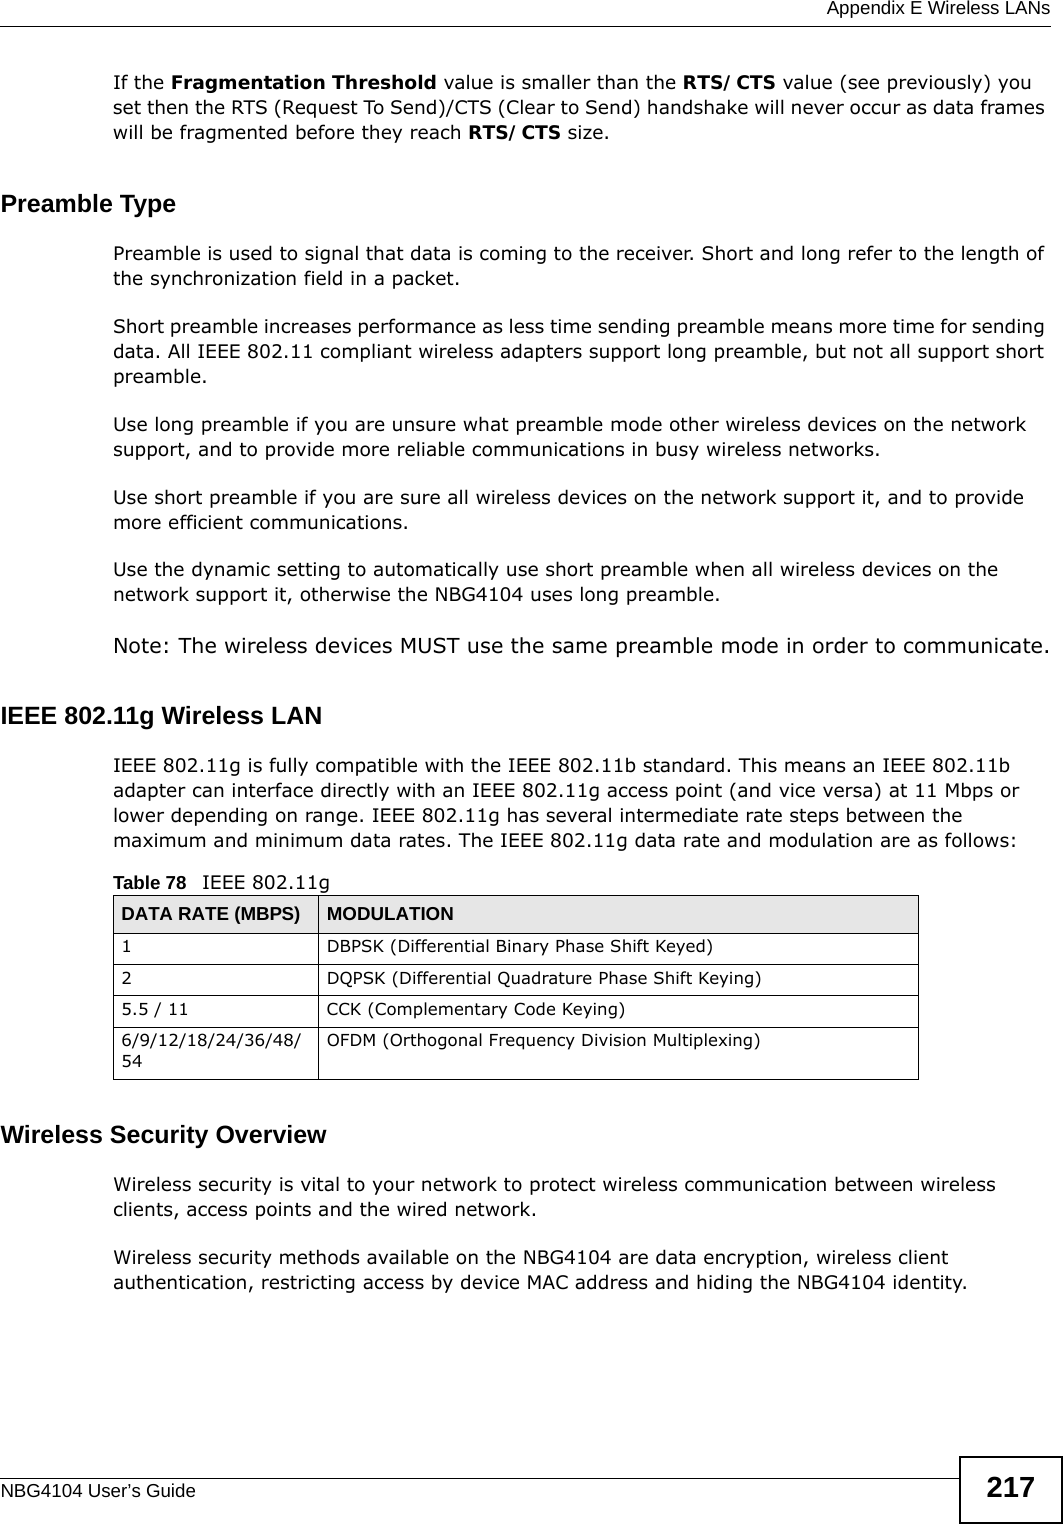  Appendix E Wireless LANsNBG4104 User’s Guide 217If the Fragmentation Threshold value is smaller than the RTS/CTS value (see previously) you set then the RTS (Request To Send)/CTS (Clear to Send) handshake will never occur as data frames will be fragmented before they reach RTS/CTS size.Preamble TypePreamble is used to signal that data is coming to the receiver. Short and long refer to the length of the synchronization field in a packet.Short preamble increases performance as less time sending preamble means more time for sending data. All IEEE 802.11 compliant wireless adapters support long preamble, but not all support short preamble. Use long preamble if you are unsure what preamble mode other wireless devices on the network support, and to provide more reliable communications in busy wireless networks. Use short preamble if you are sure all wireless devices on the network support it, and to provide more efficient communications.Use the dynamic setting to automatically use short preamble when all wireless devices on the network support it, otherwise the NBG4104 uses long preamble.Note: The wireless devices MUST use the same preamble mode in order to communicate.IEEE 802.11g Wireless LANIEEE 802.11g is fully compatible with the IEEE 802.11b standard. This means an IEEE 802.11b adapter can interface directly with an IEEE 802.11g access point (and vice versa) at 11 Mbps or lower depending on range. IEEE 802.11g has several intermediate rate steps between the maximum and minimum data rates. The IEEE 802.11g data rate and modulation are as follows:Wireless Security OverviewWireless security is vital to your network to protect wireless communication between wireless clients, access points and the wired network.Wireless security methods available on the NBG4104 are data encryption, wireless client authentication, restricting access by device MAC address and hiding the NBG4104 identity.Table 78   IEEE 802.11gDATA RATE (MBPS) MODULATION1 DBPSK (Differential Binary Phase Shift Keyed)2 DQPSK (Differential Quadrature Phase Shift Keying)5.5 / 11 CCK (Complementary Code Keying) 6/9/12/18/24/36/48/54OFDM (Orthogonal Frequency Division Multiplexing) 